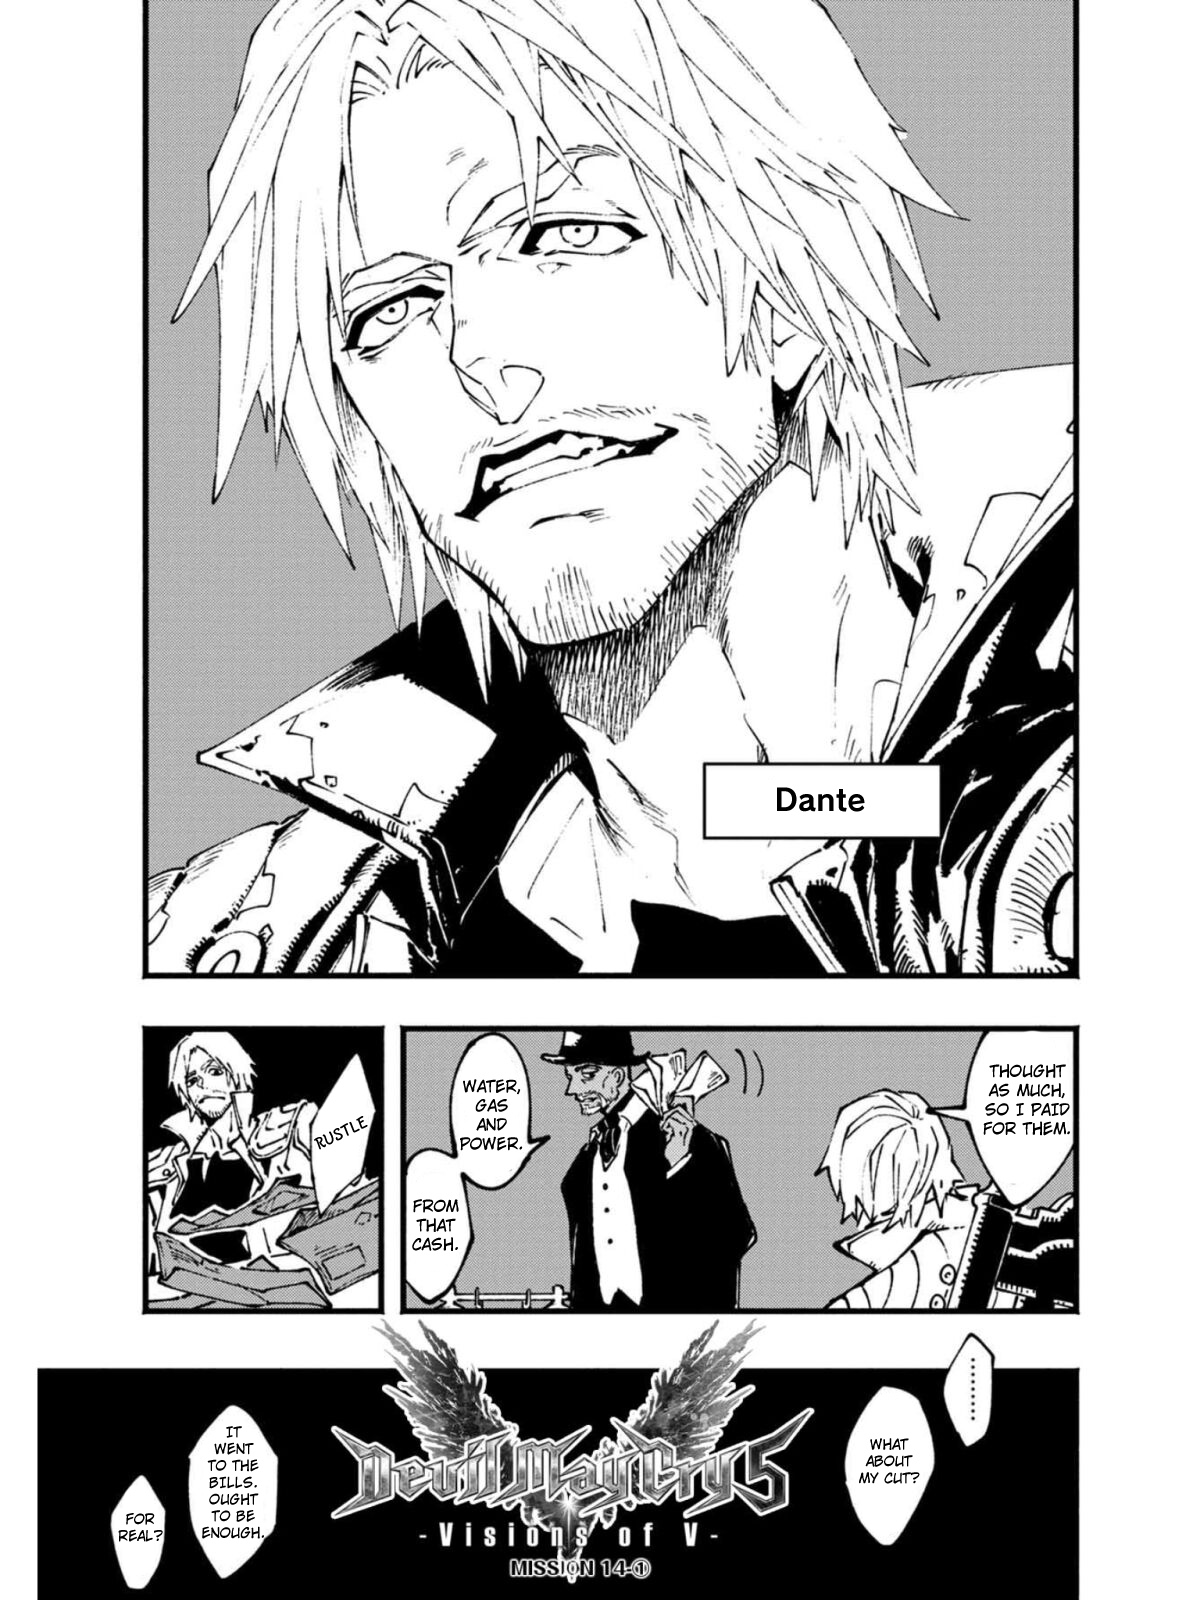 Devil May Cry 5 Visions of V Ch. 14